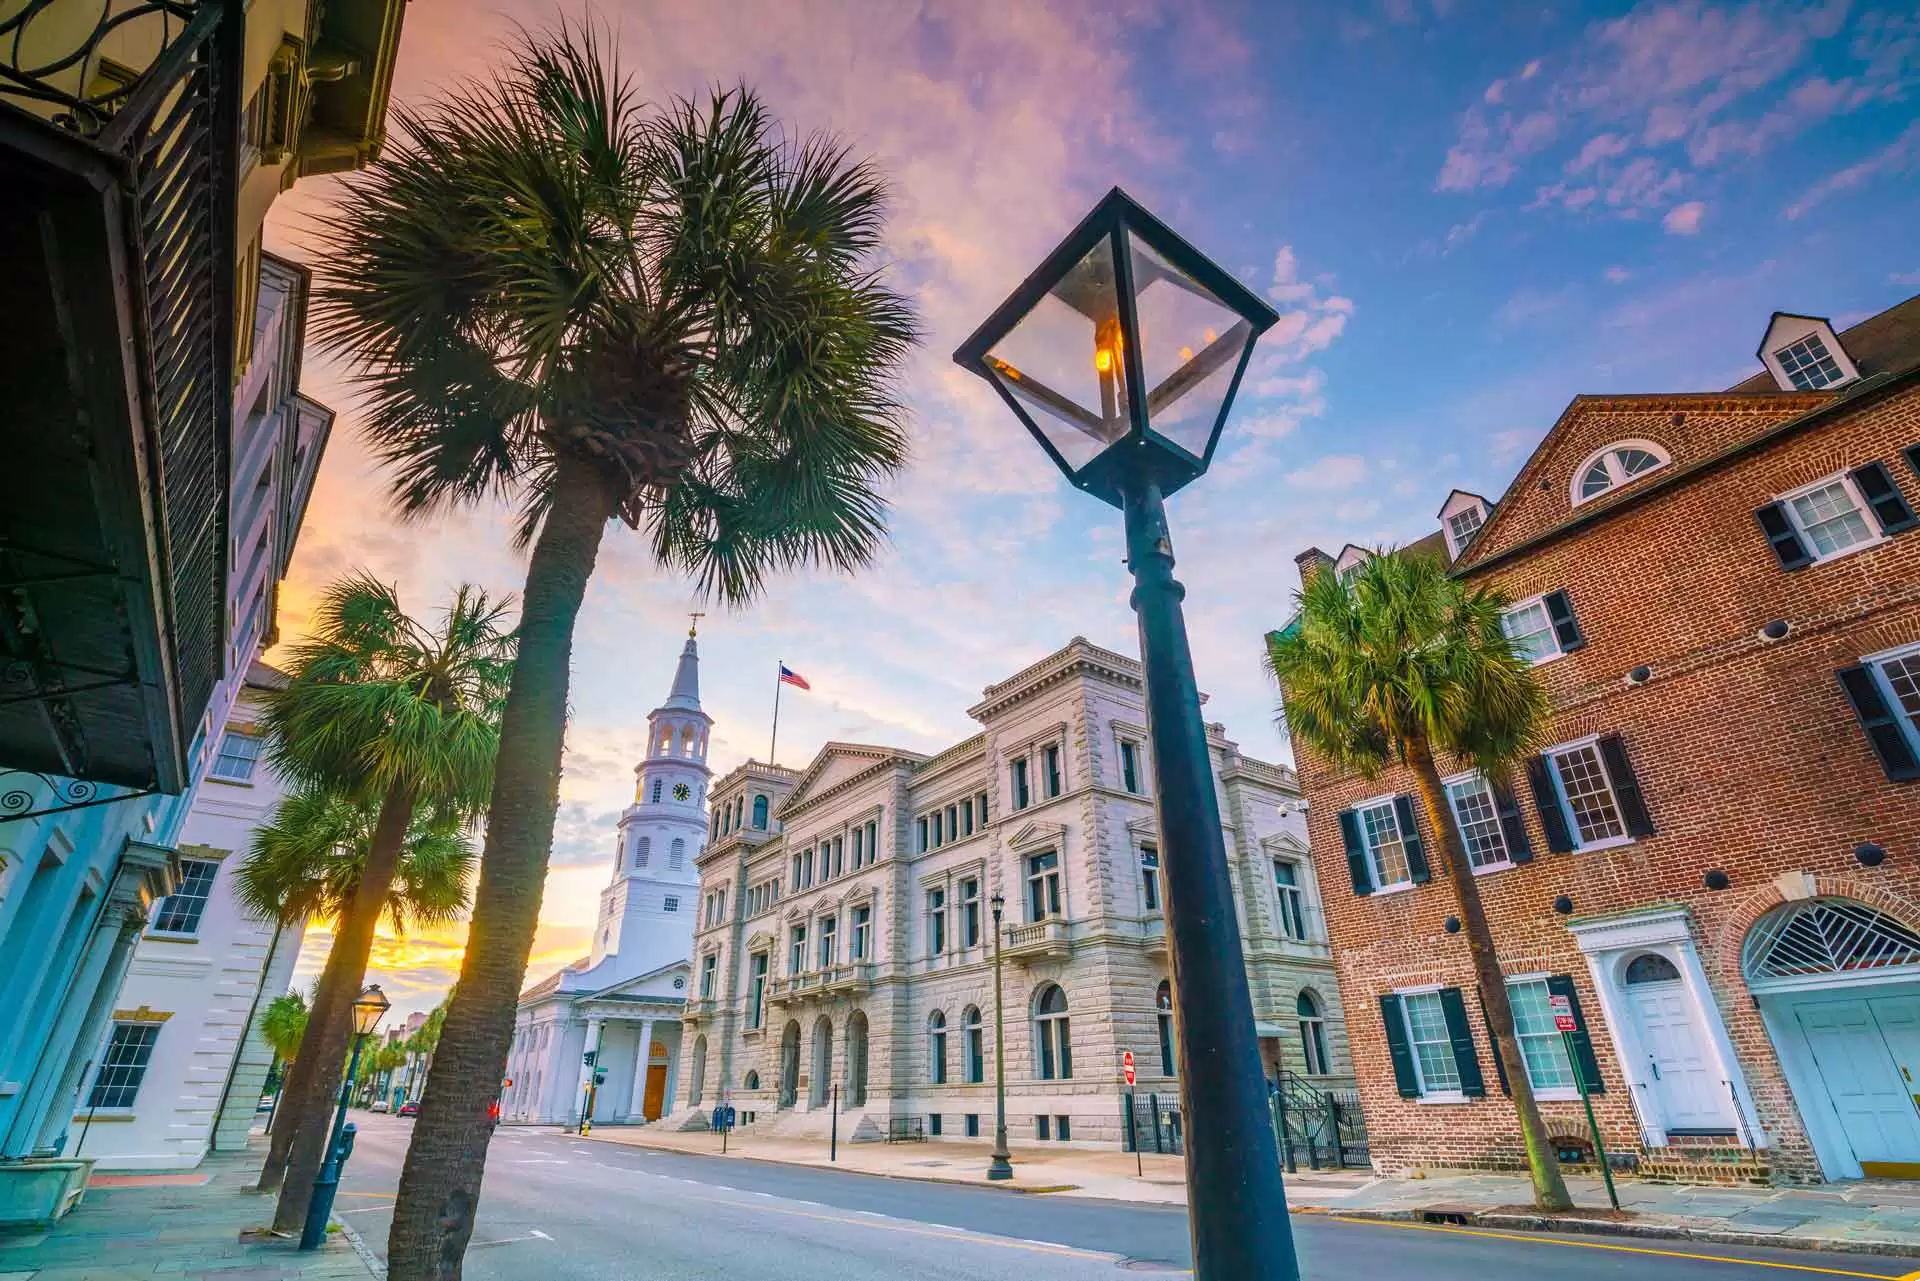 We are Barrow Law Firm. We serve the Charleston, SC area and beyond.